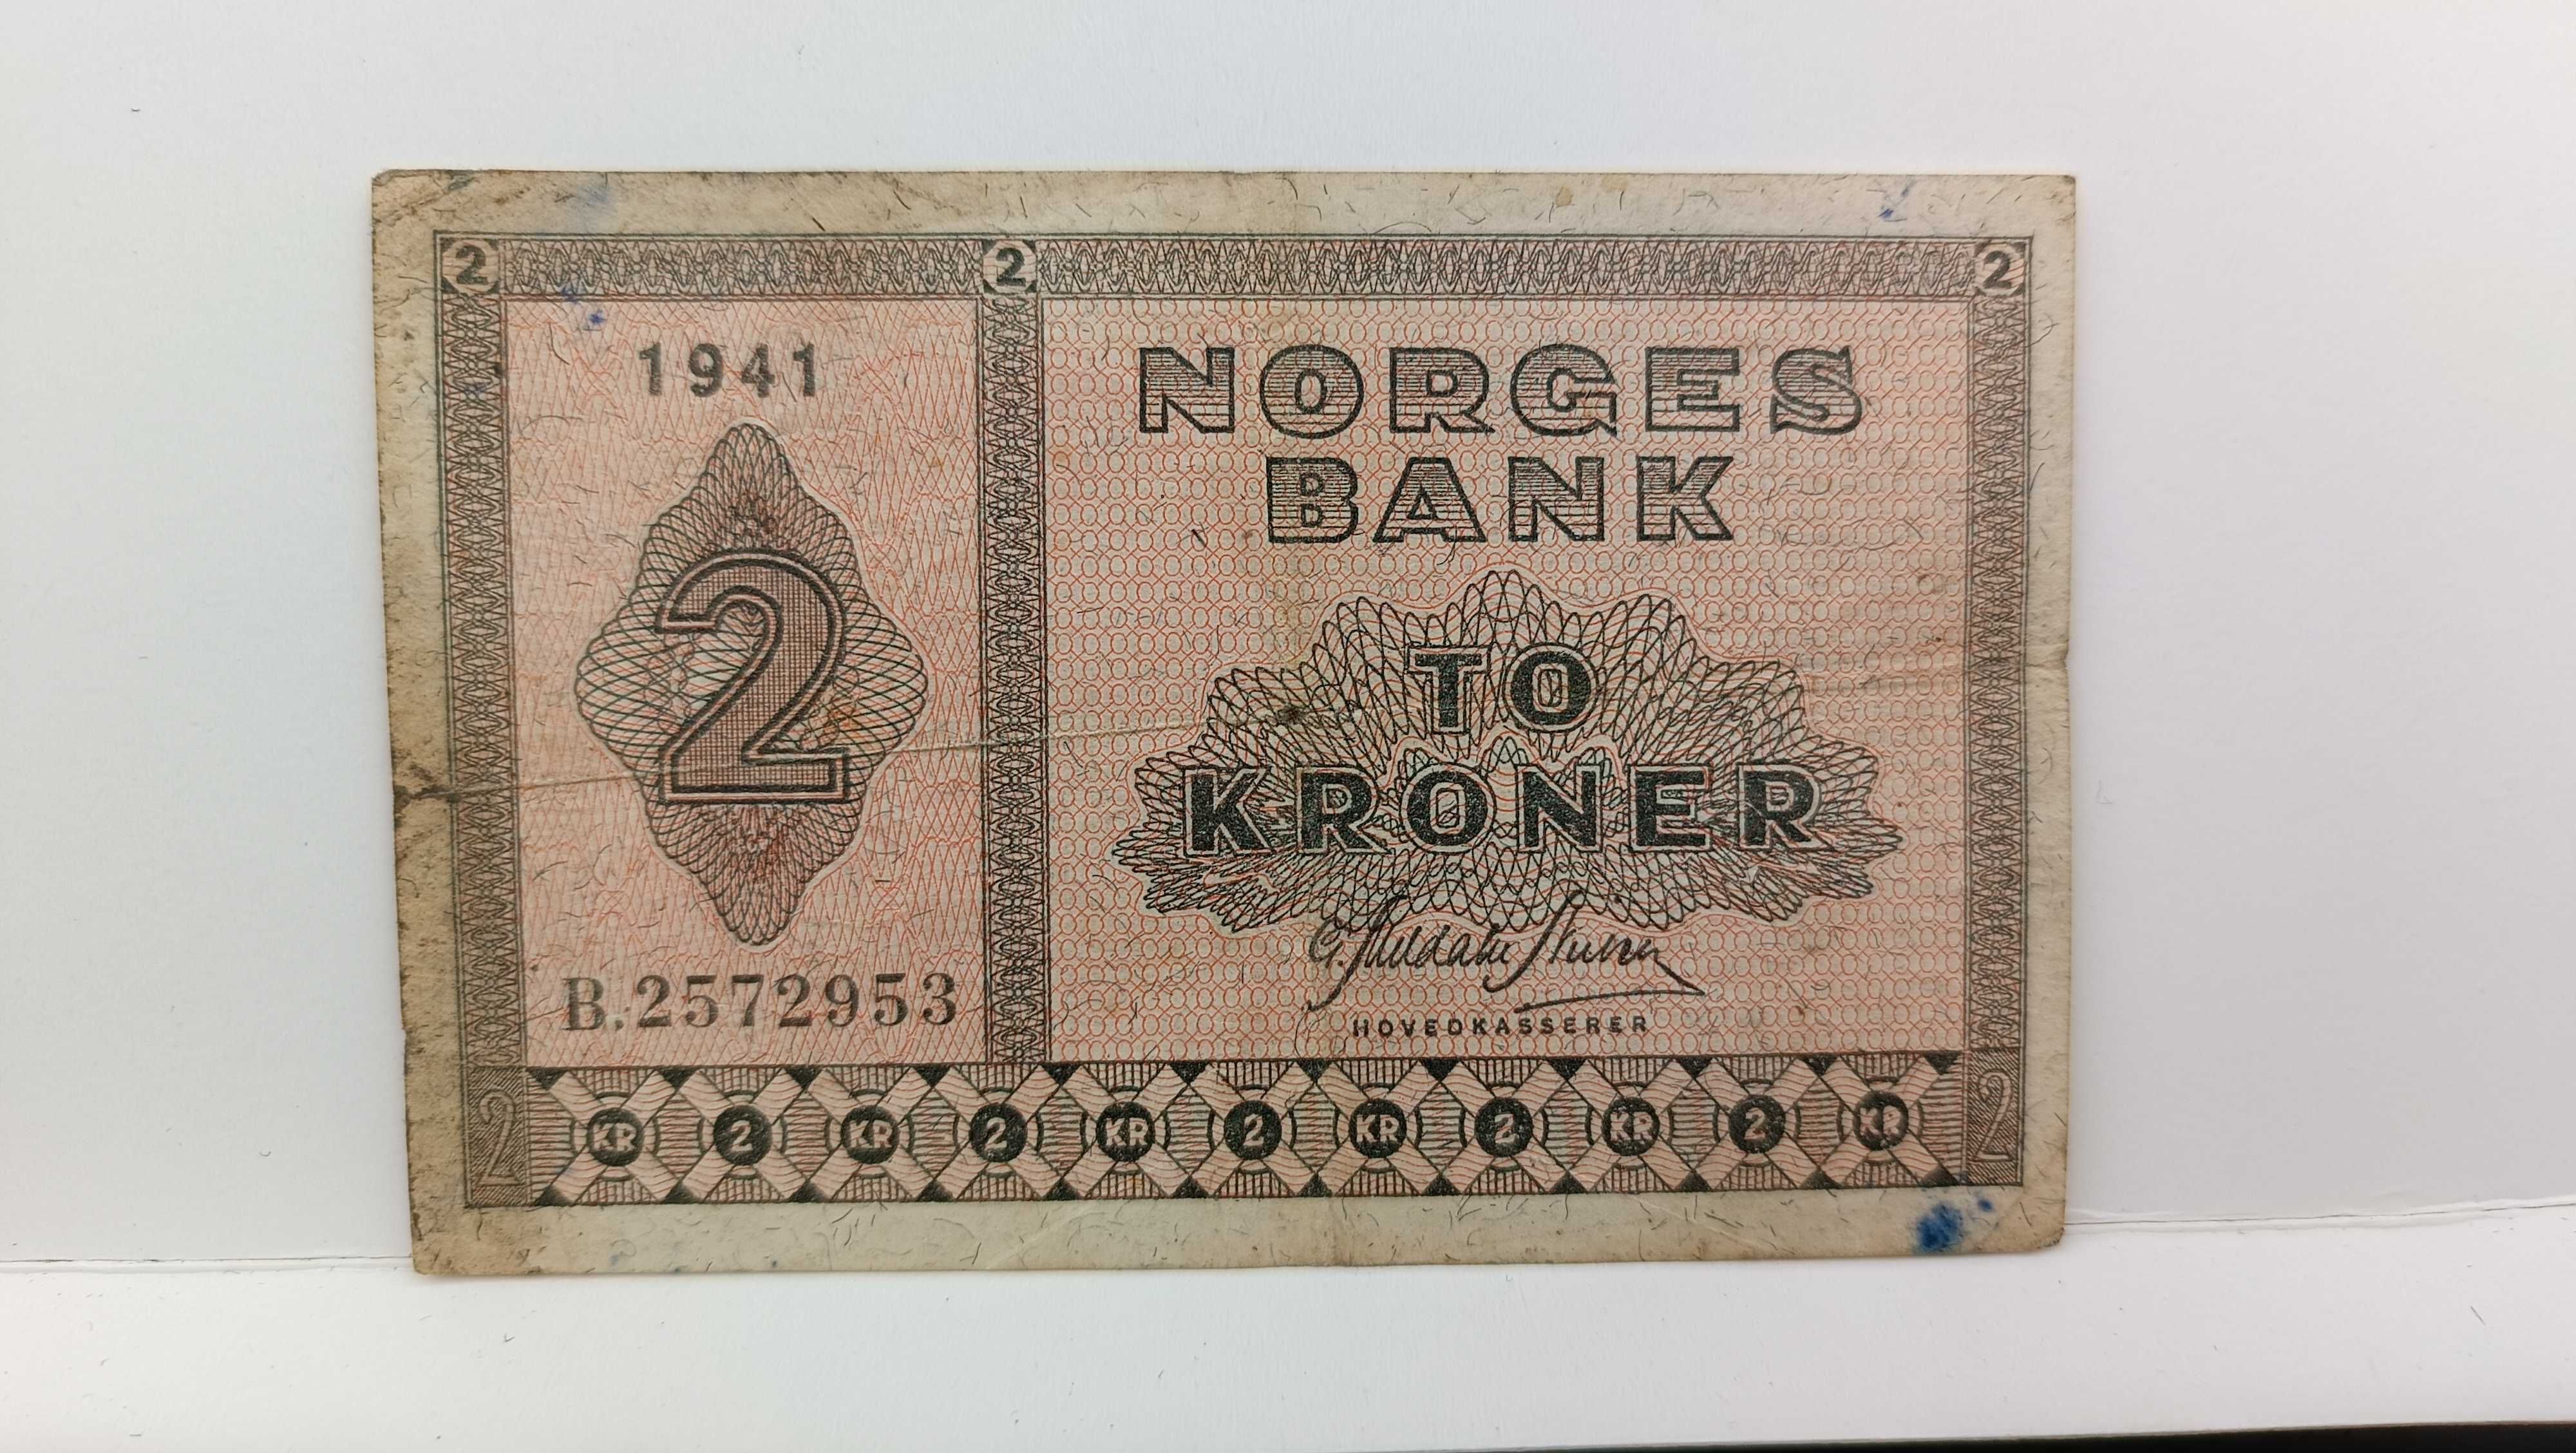 banknot To Kroner Norges Bank 2 korony norweskie 1941 r. stan III-/IV+